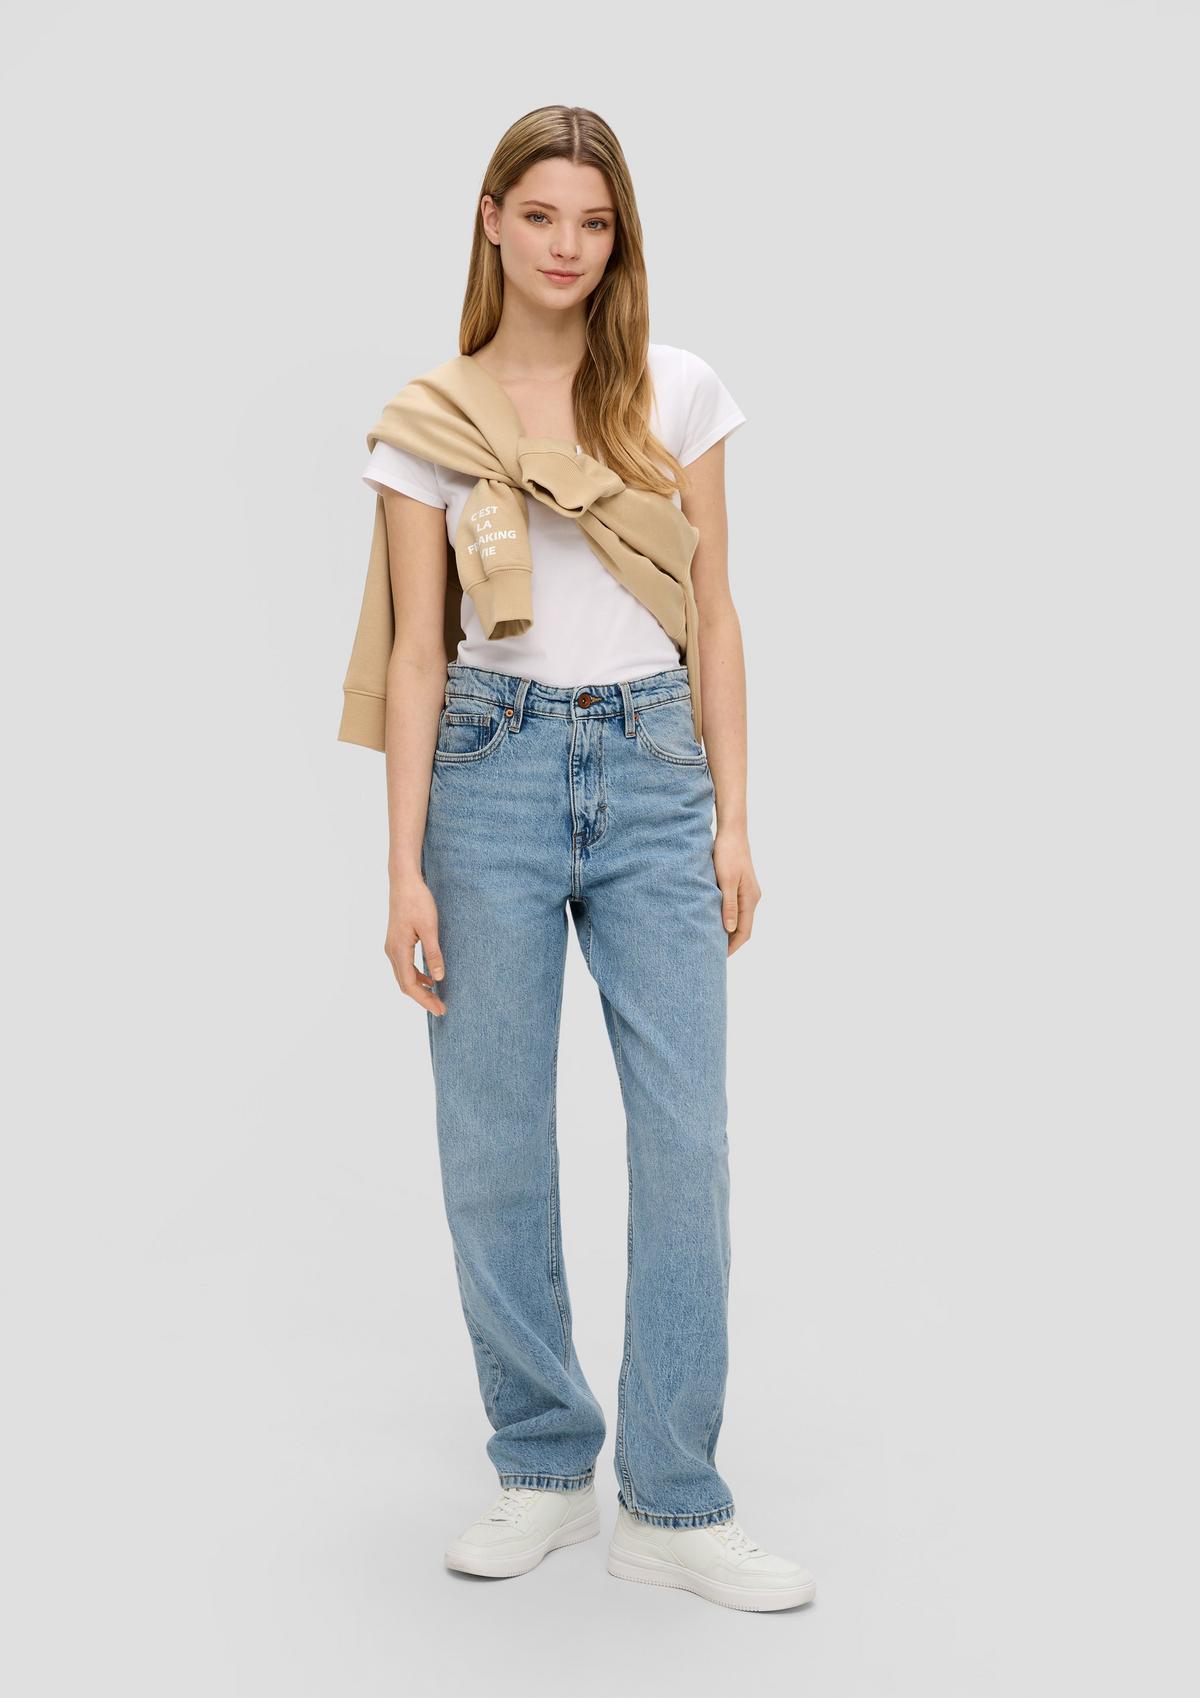 Jeans / loose fit / mid rise / straight leg